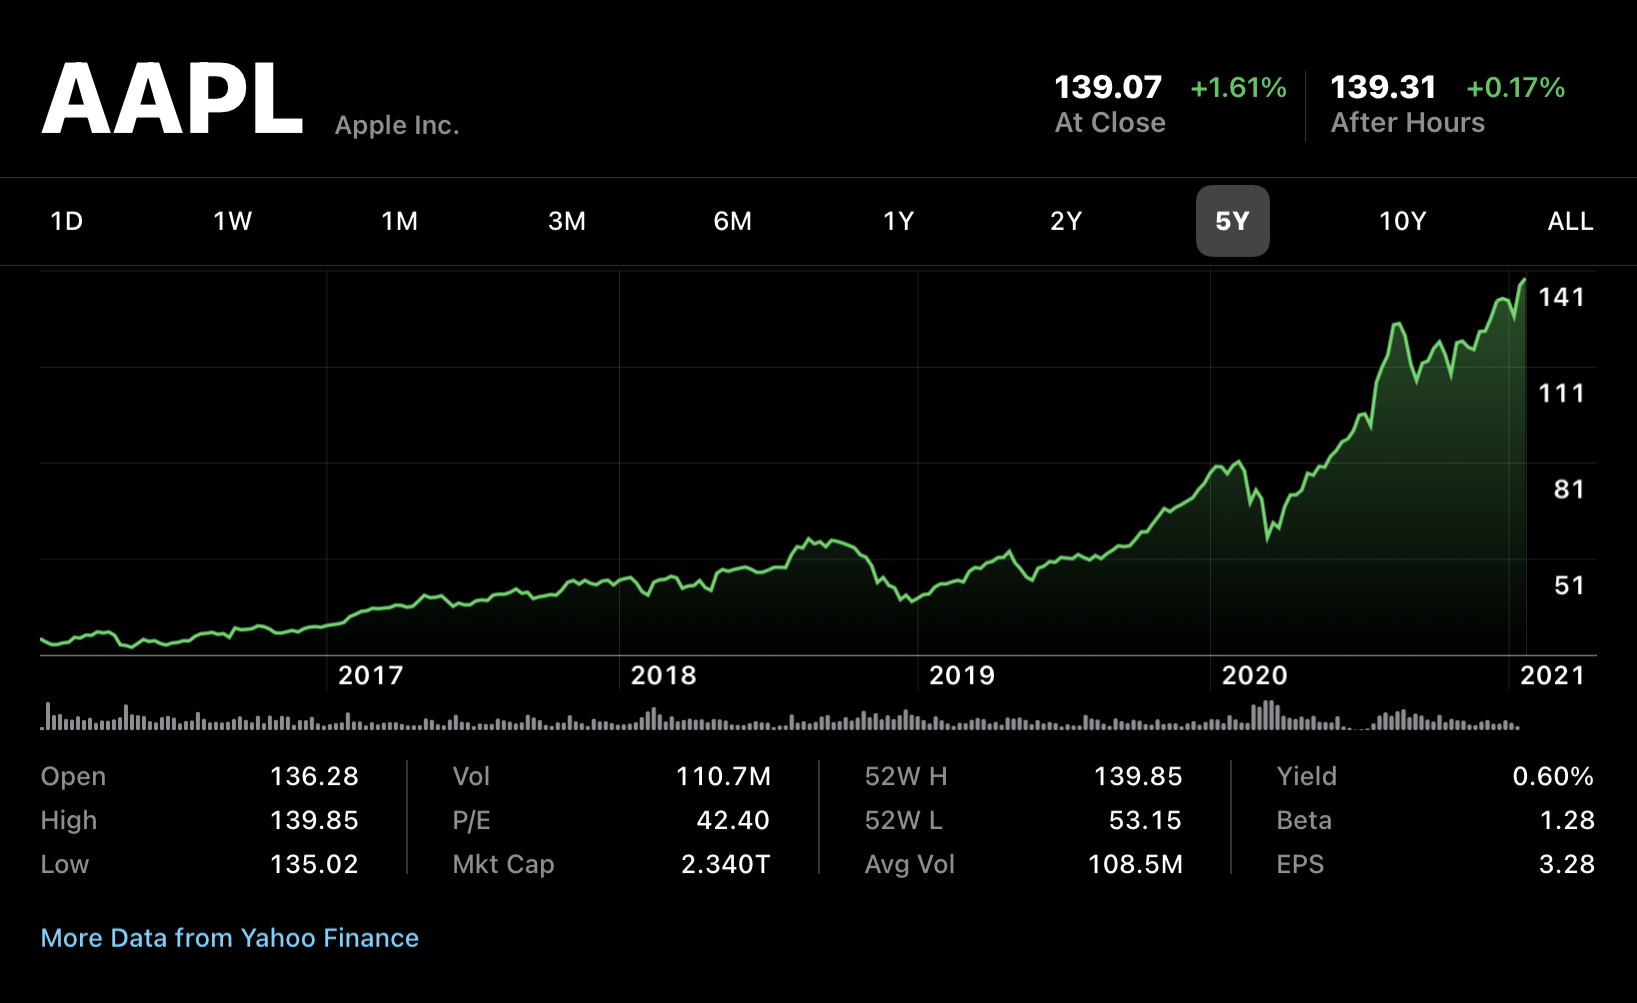 AAPL all-time high